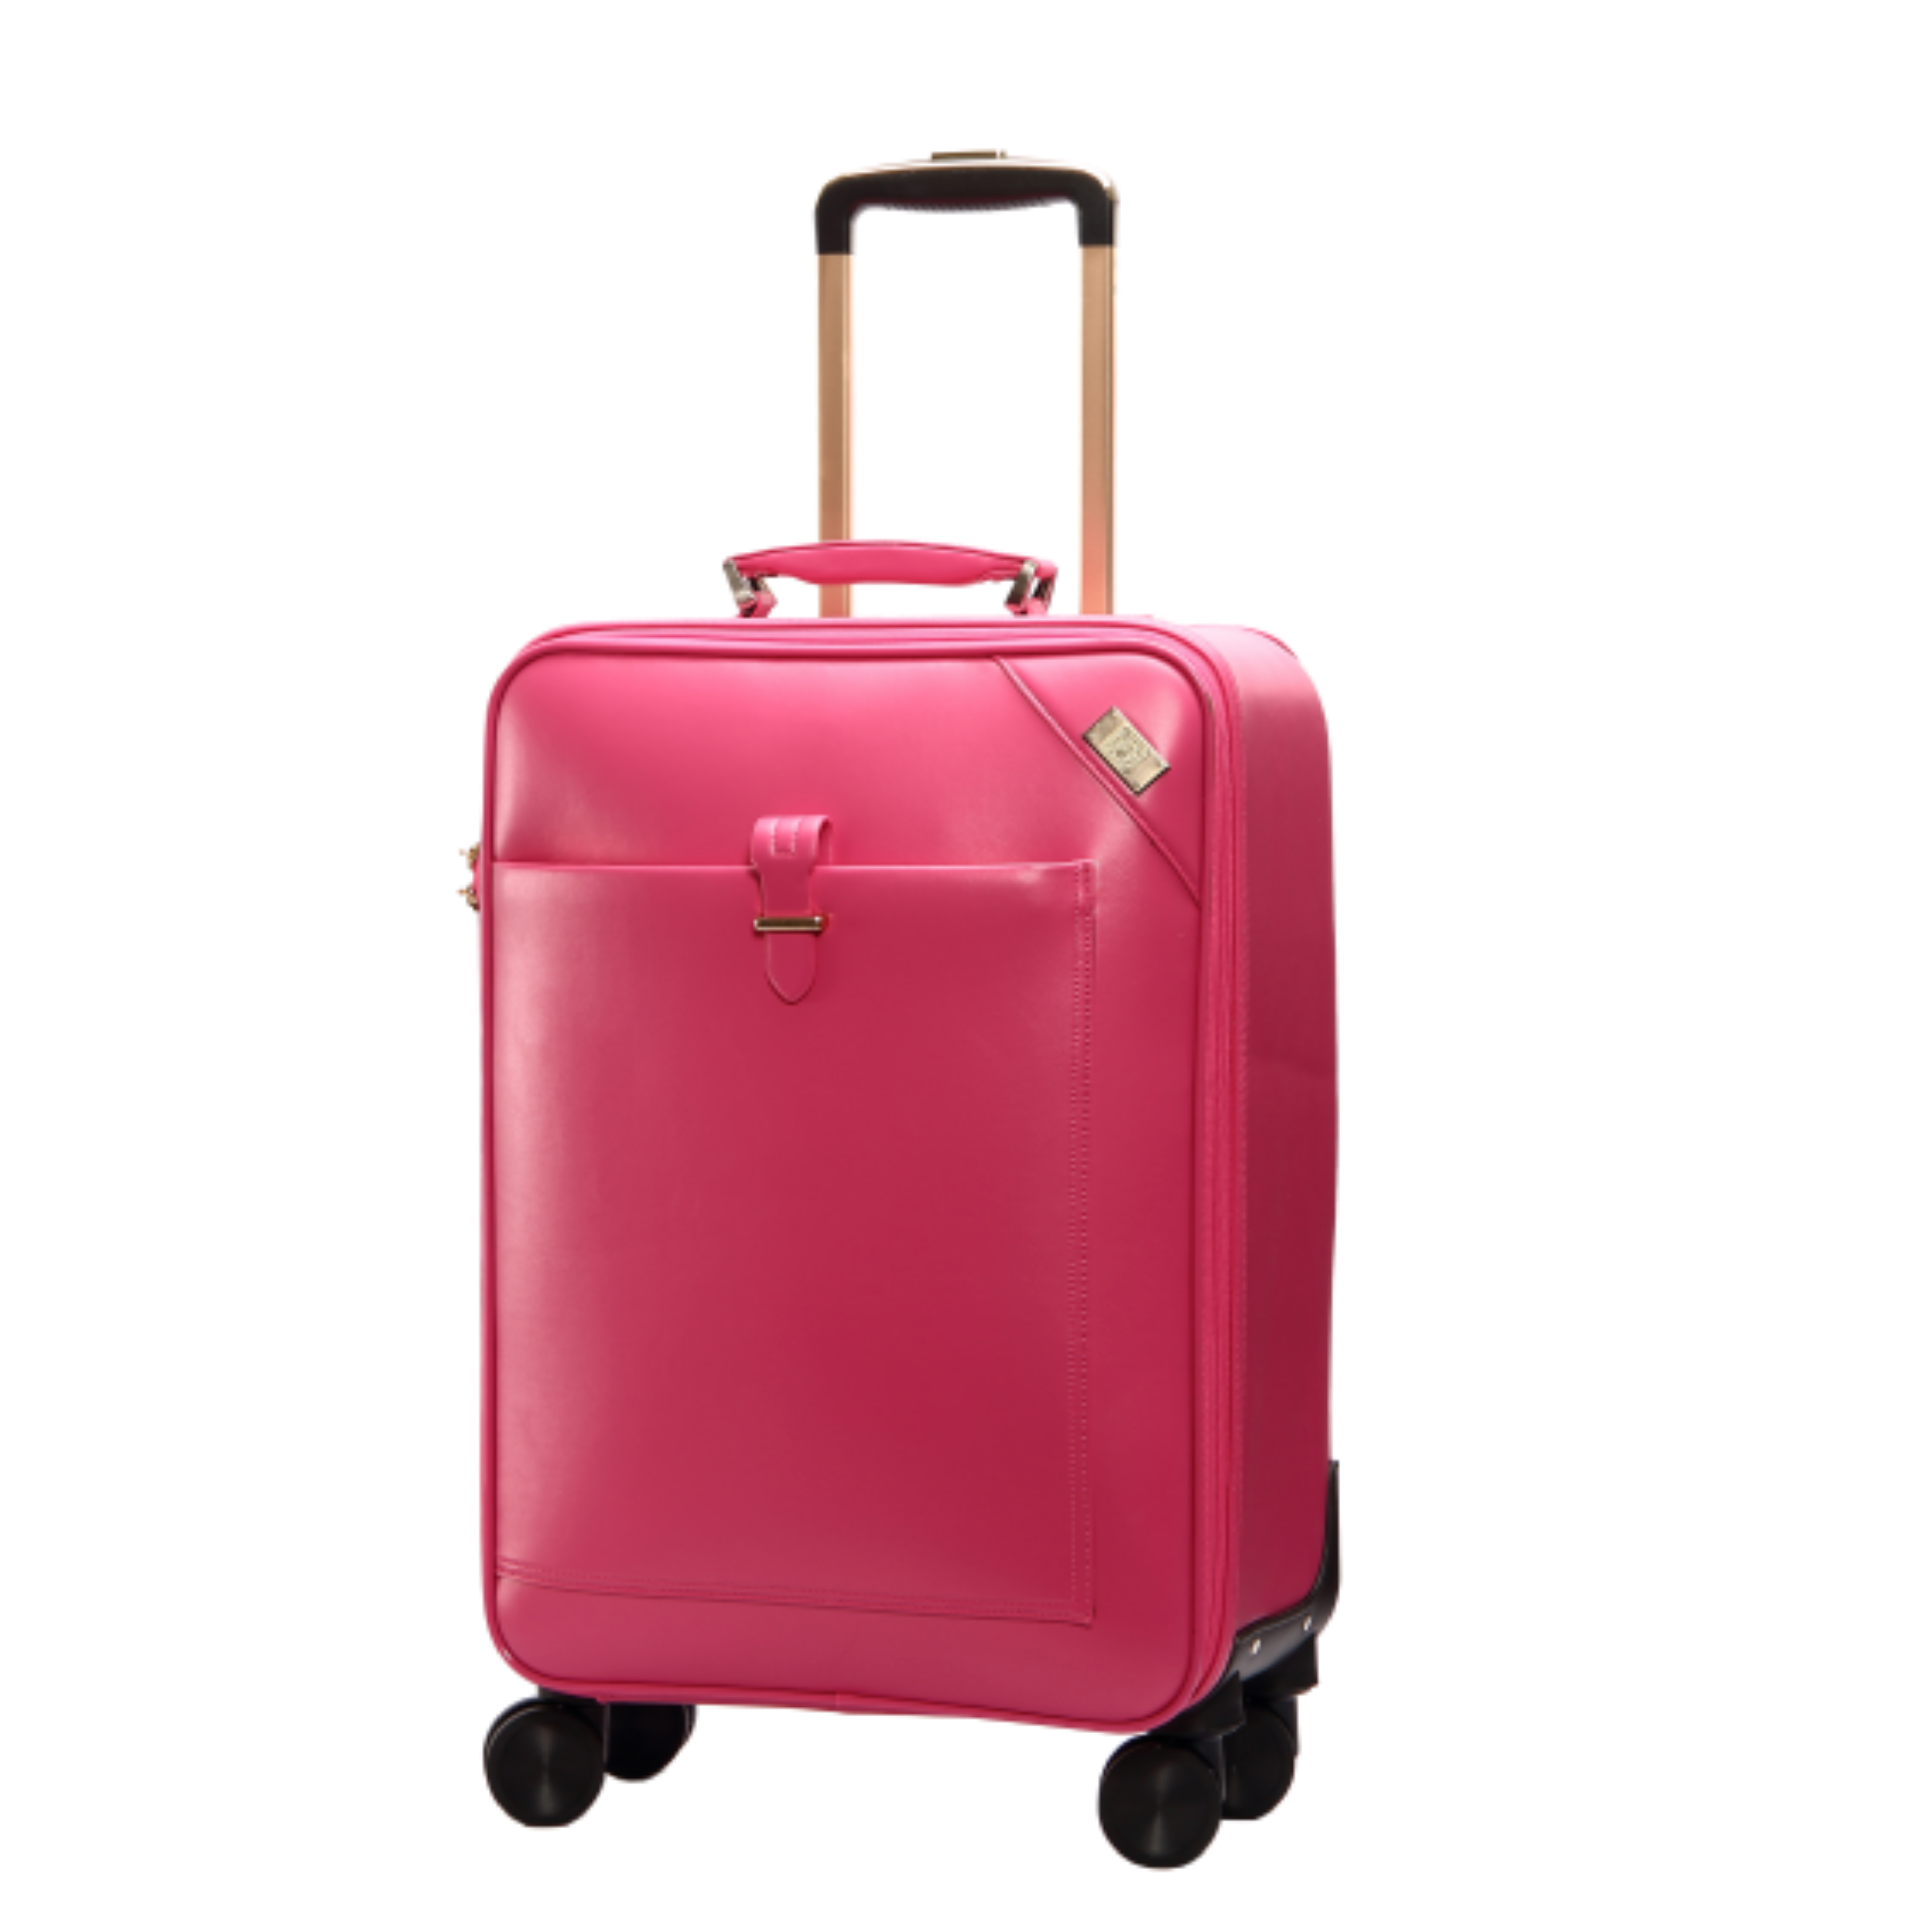 SEMMS HOT PINK LUXURIOUS LEATHER LUGGAGE